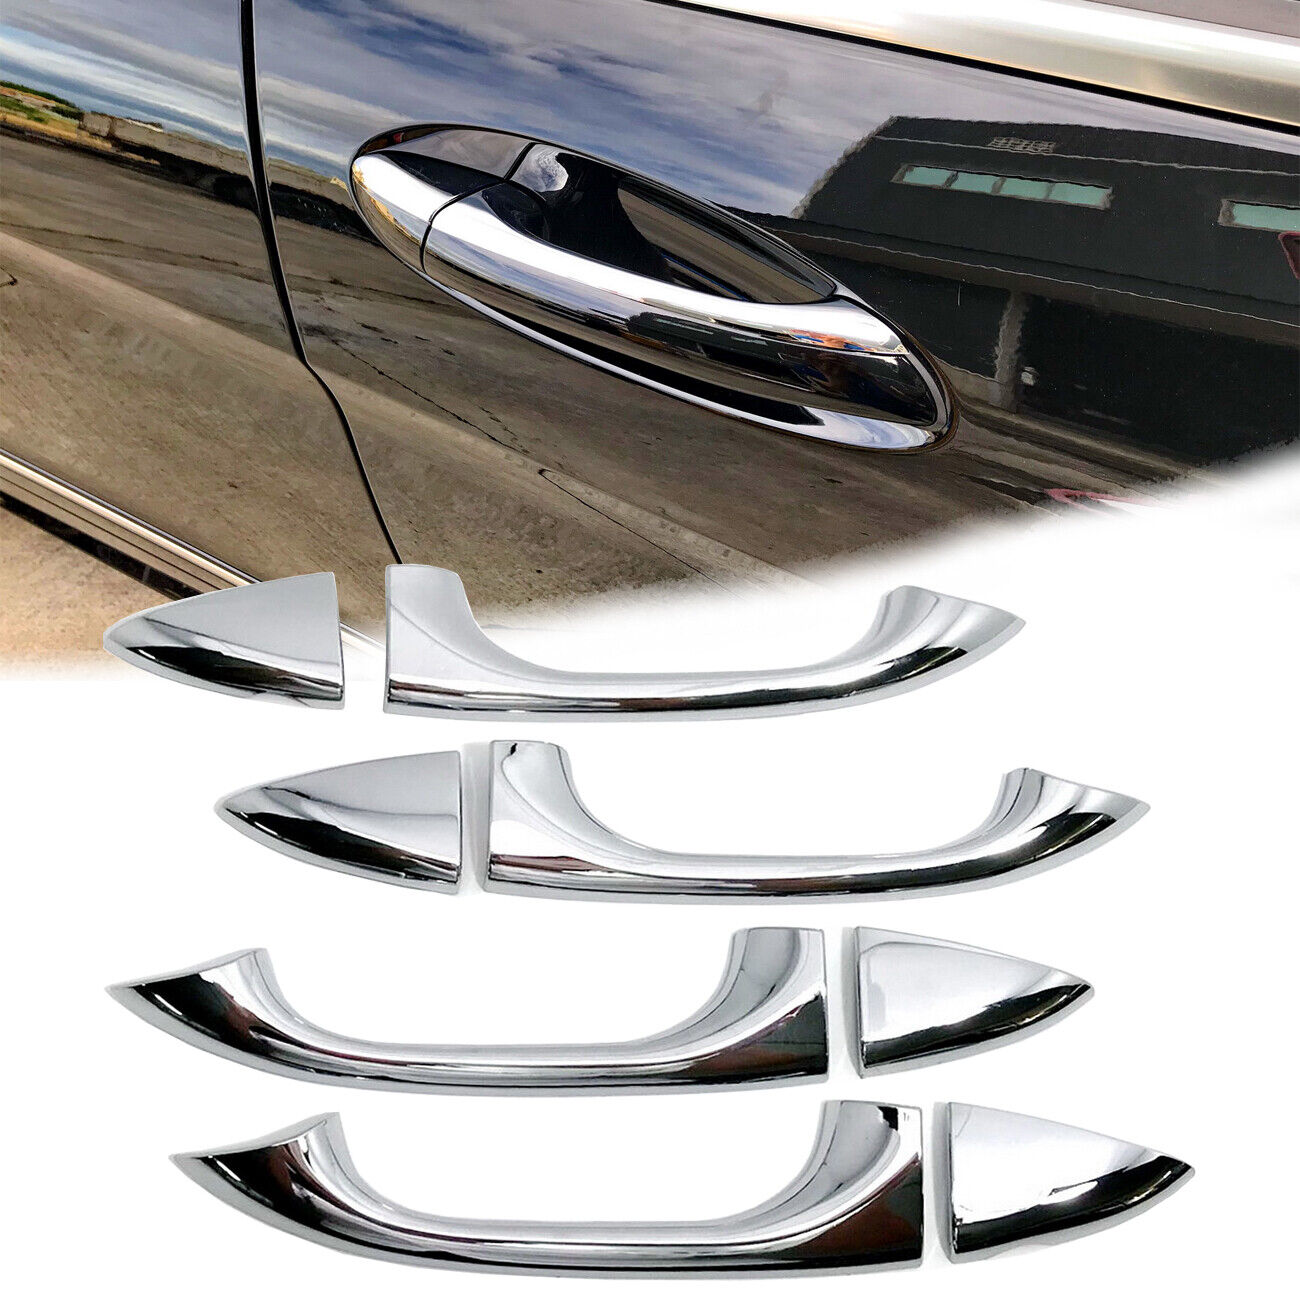 8x Half Handle Cover Gloss Mirror Chrome Silver Fit 00-06 W220 S320 S500 S65 S55